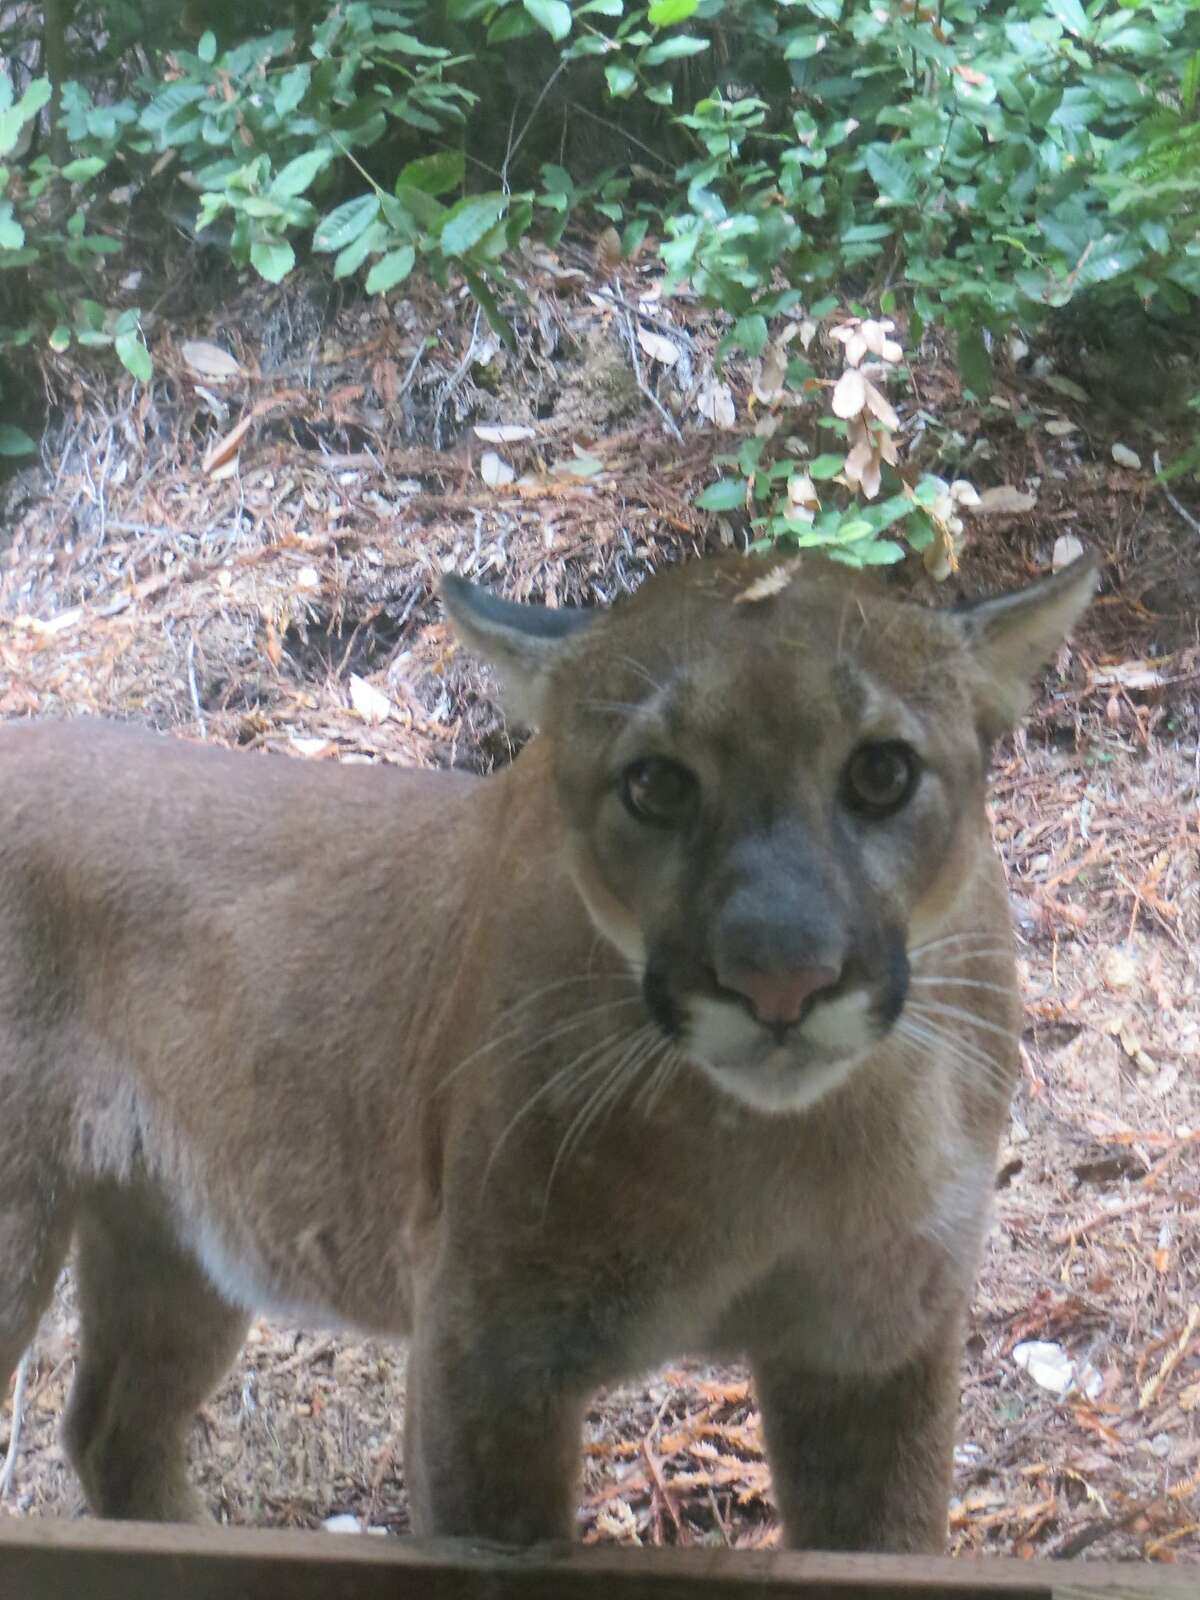 While at a desk at her home in Gualala in Mendocino County, Cece Case heard a noise, turned and found this mountain lion staring at her through the window. Cece believes the lion may have hunting her house cats. File photo taken on Sept. 12, 2014.  